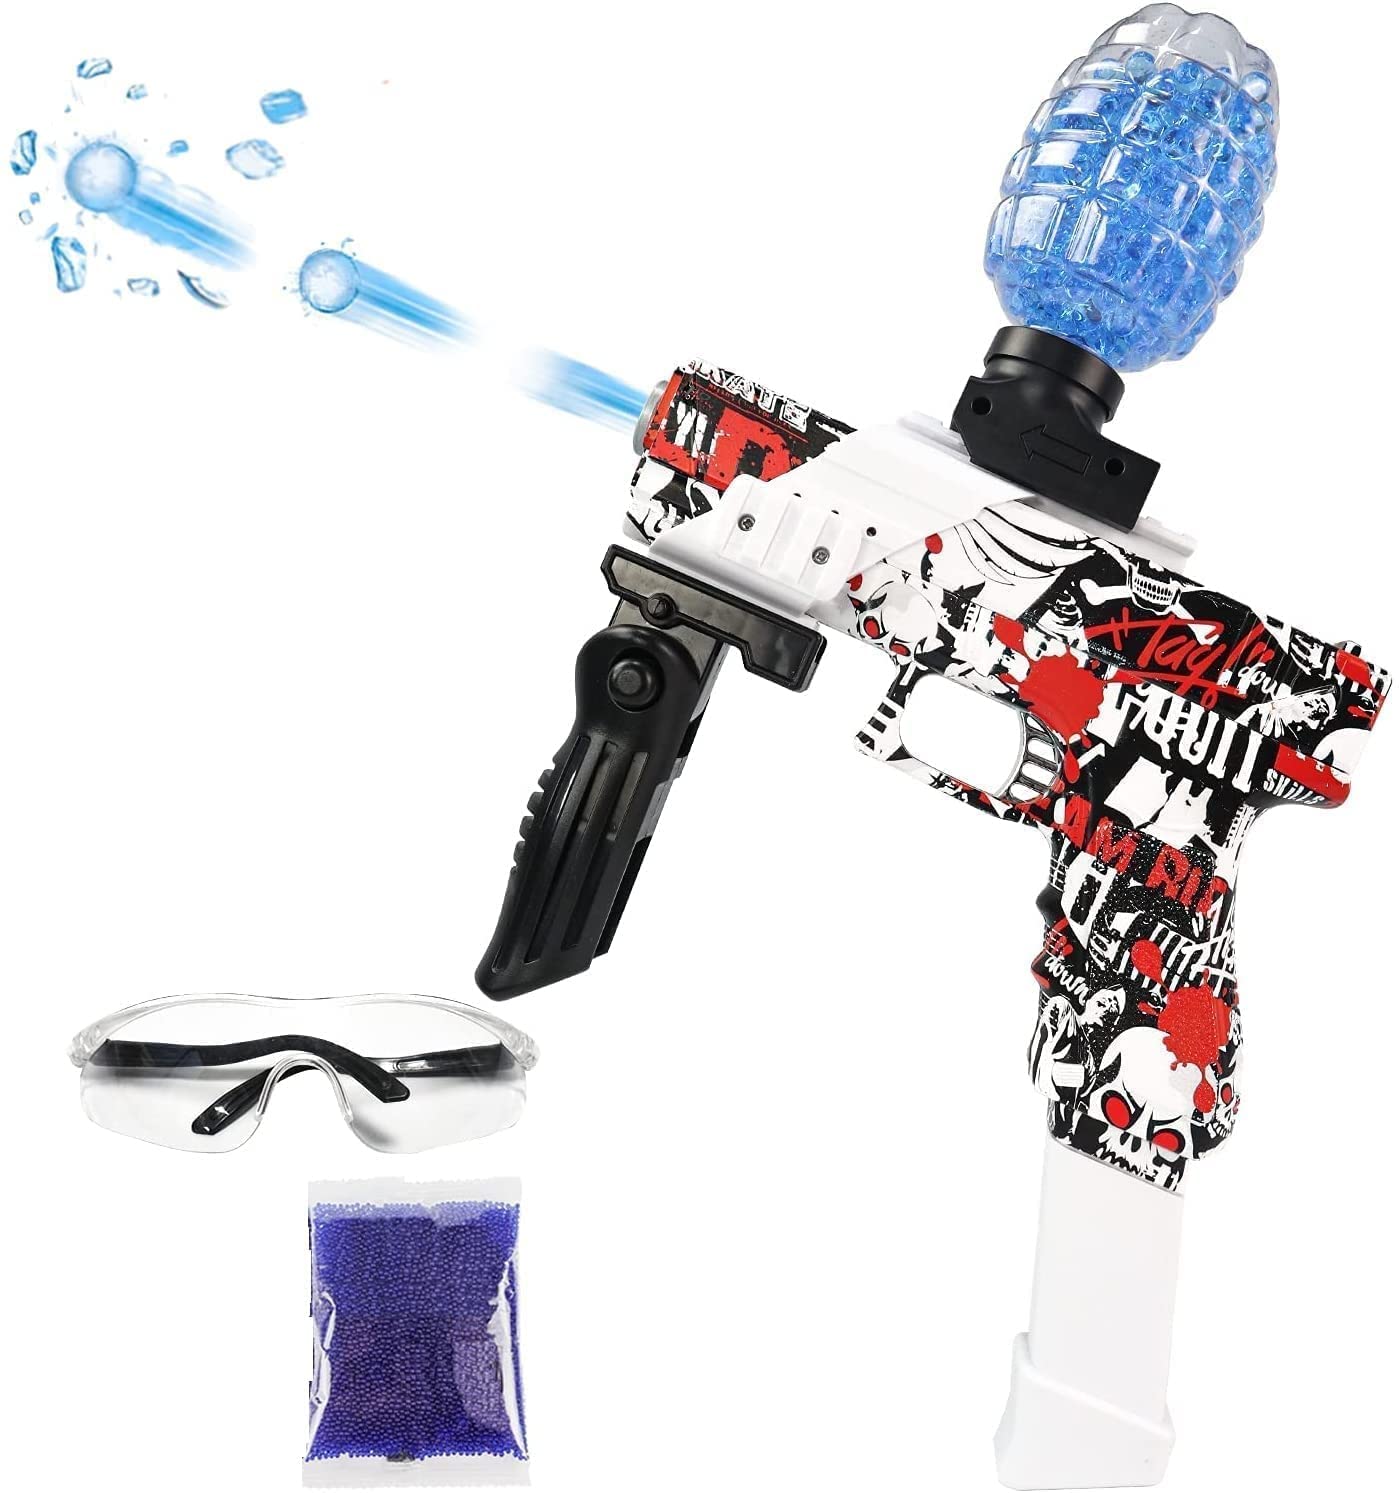 Gel Blaster Gun Automatic Toy Gun for Kids Electric Operated Gun Toy High Speed Upto 50 Feet Range Including 10000 Gel Balls Color Red